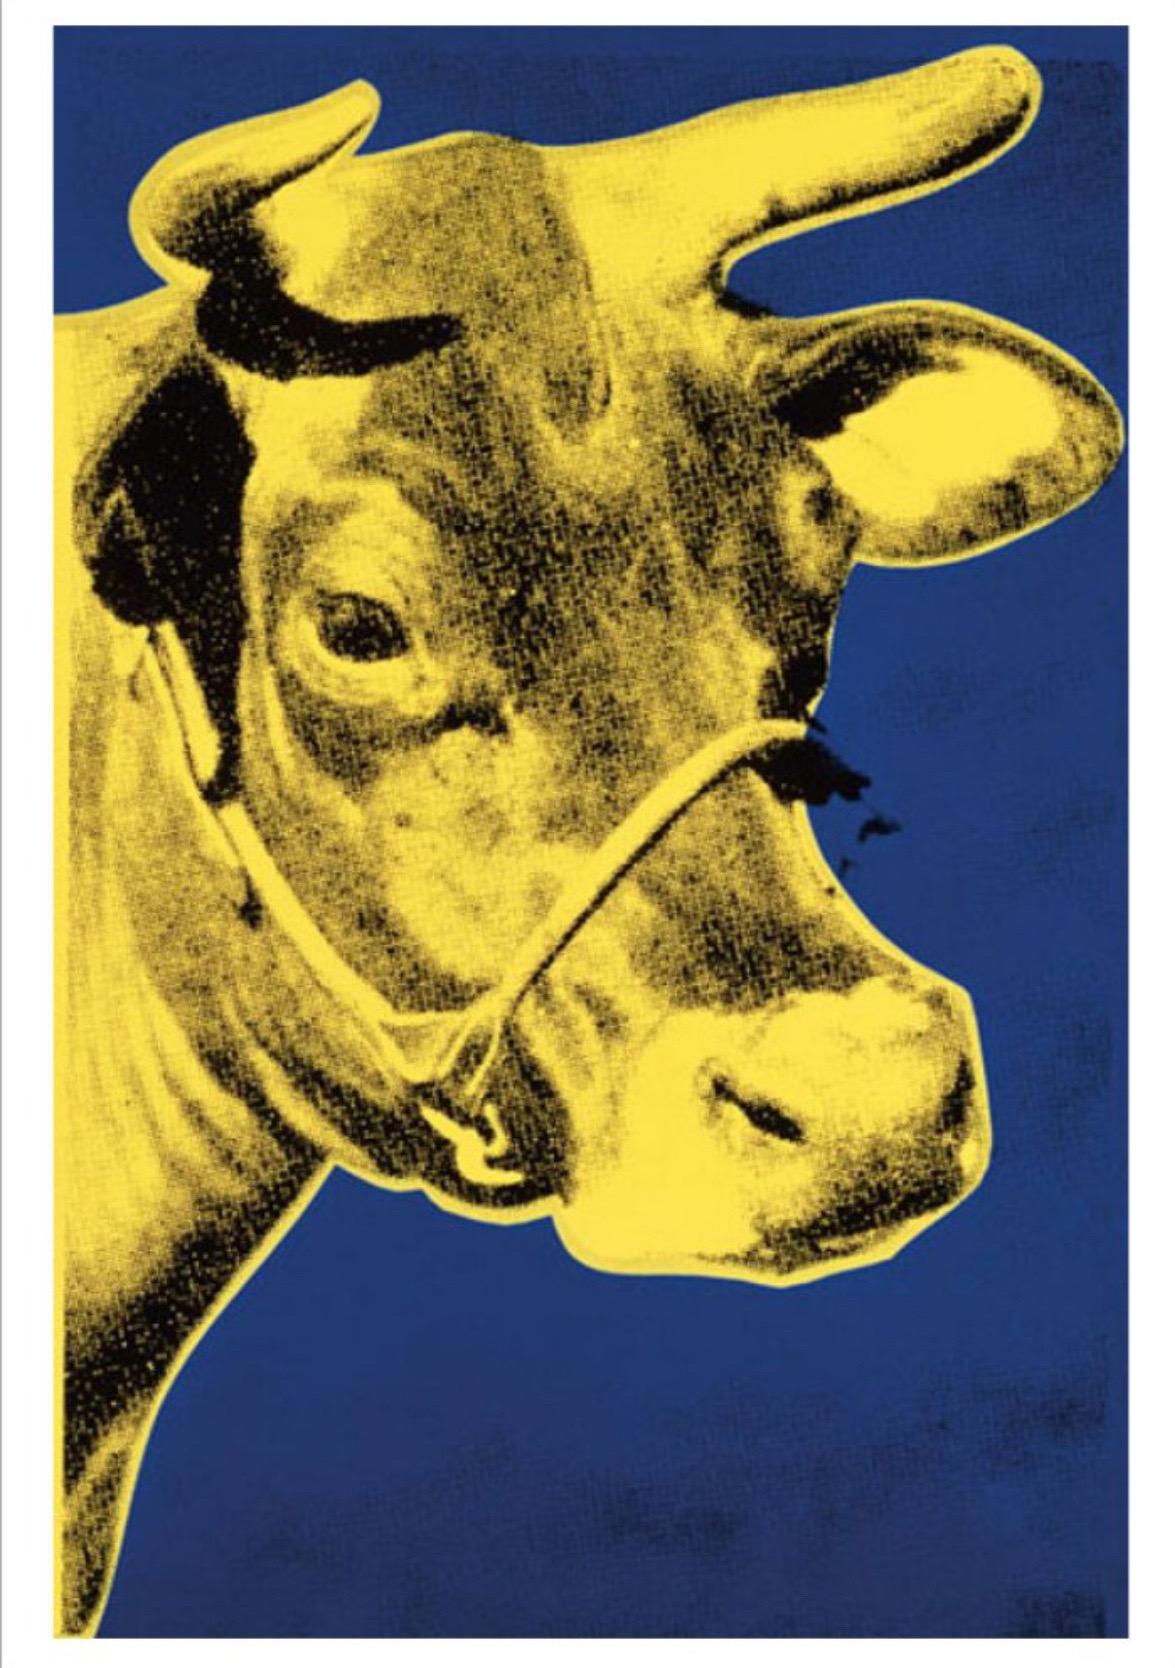 Andy Warhol, Cow, 1971 (blue & yellow)

Matt 250gsm conservation digital paper

Image size 30 x 46 cm (11.81 x 18.11 in) 
Paper size 33 x 48 cm (12.99 x 18.89 in) 

In a 1966 exhibition at the Leo Castelli gallery in New York City, Warhol covered